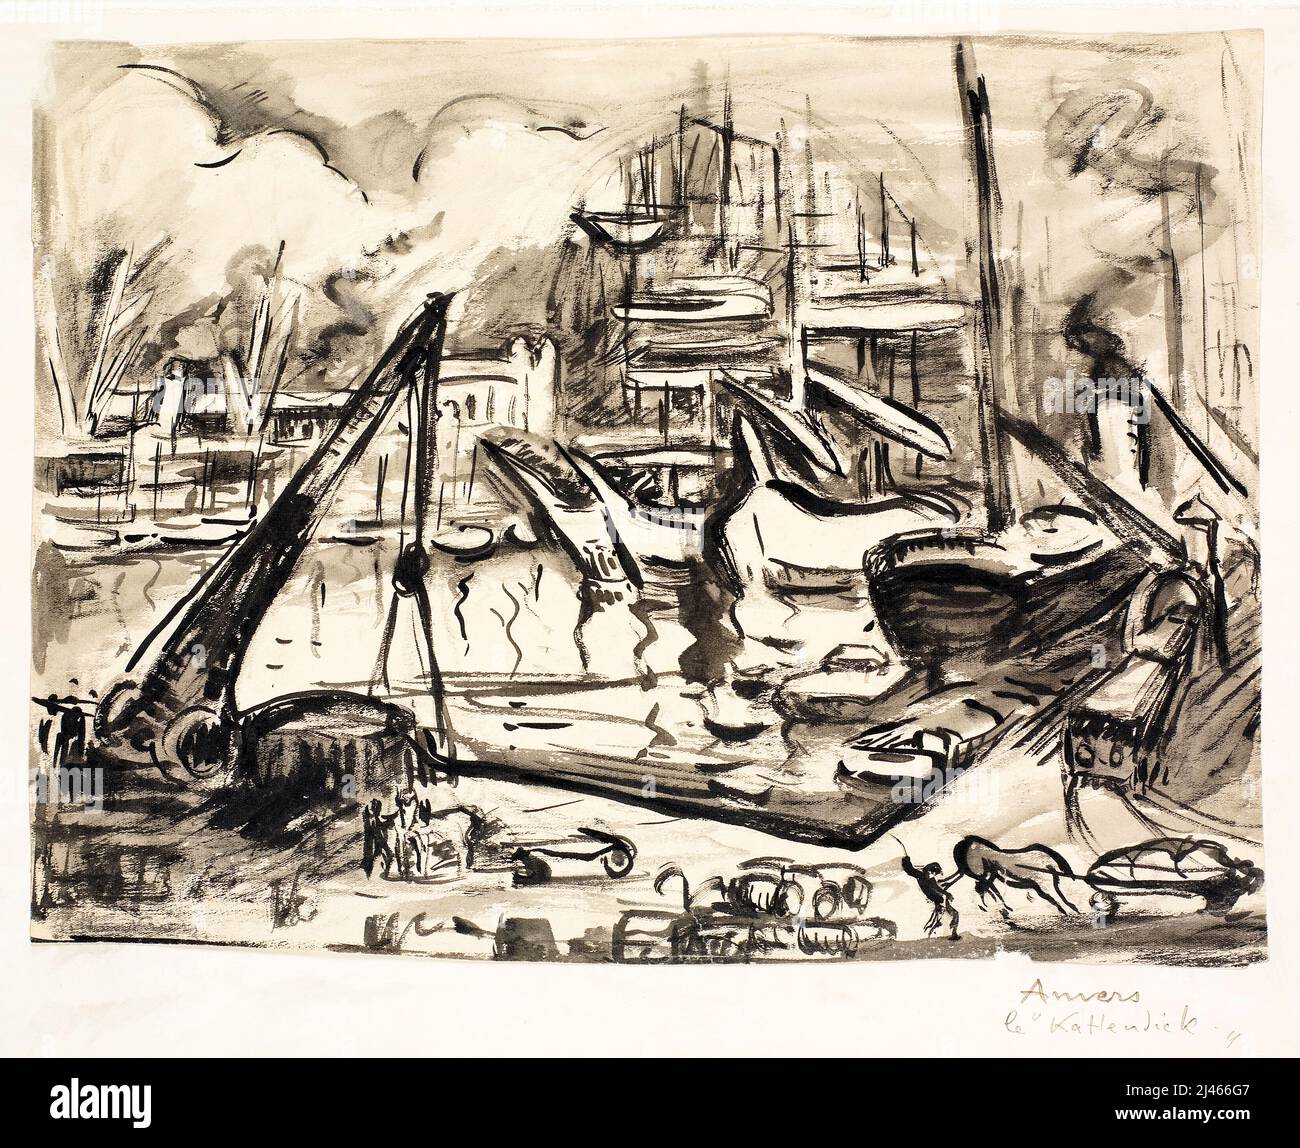 Othon Friesz, The harbor basin Kattendick in Antwerp, painting in black and gray ink, 1906 Stock Photo